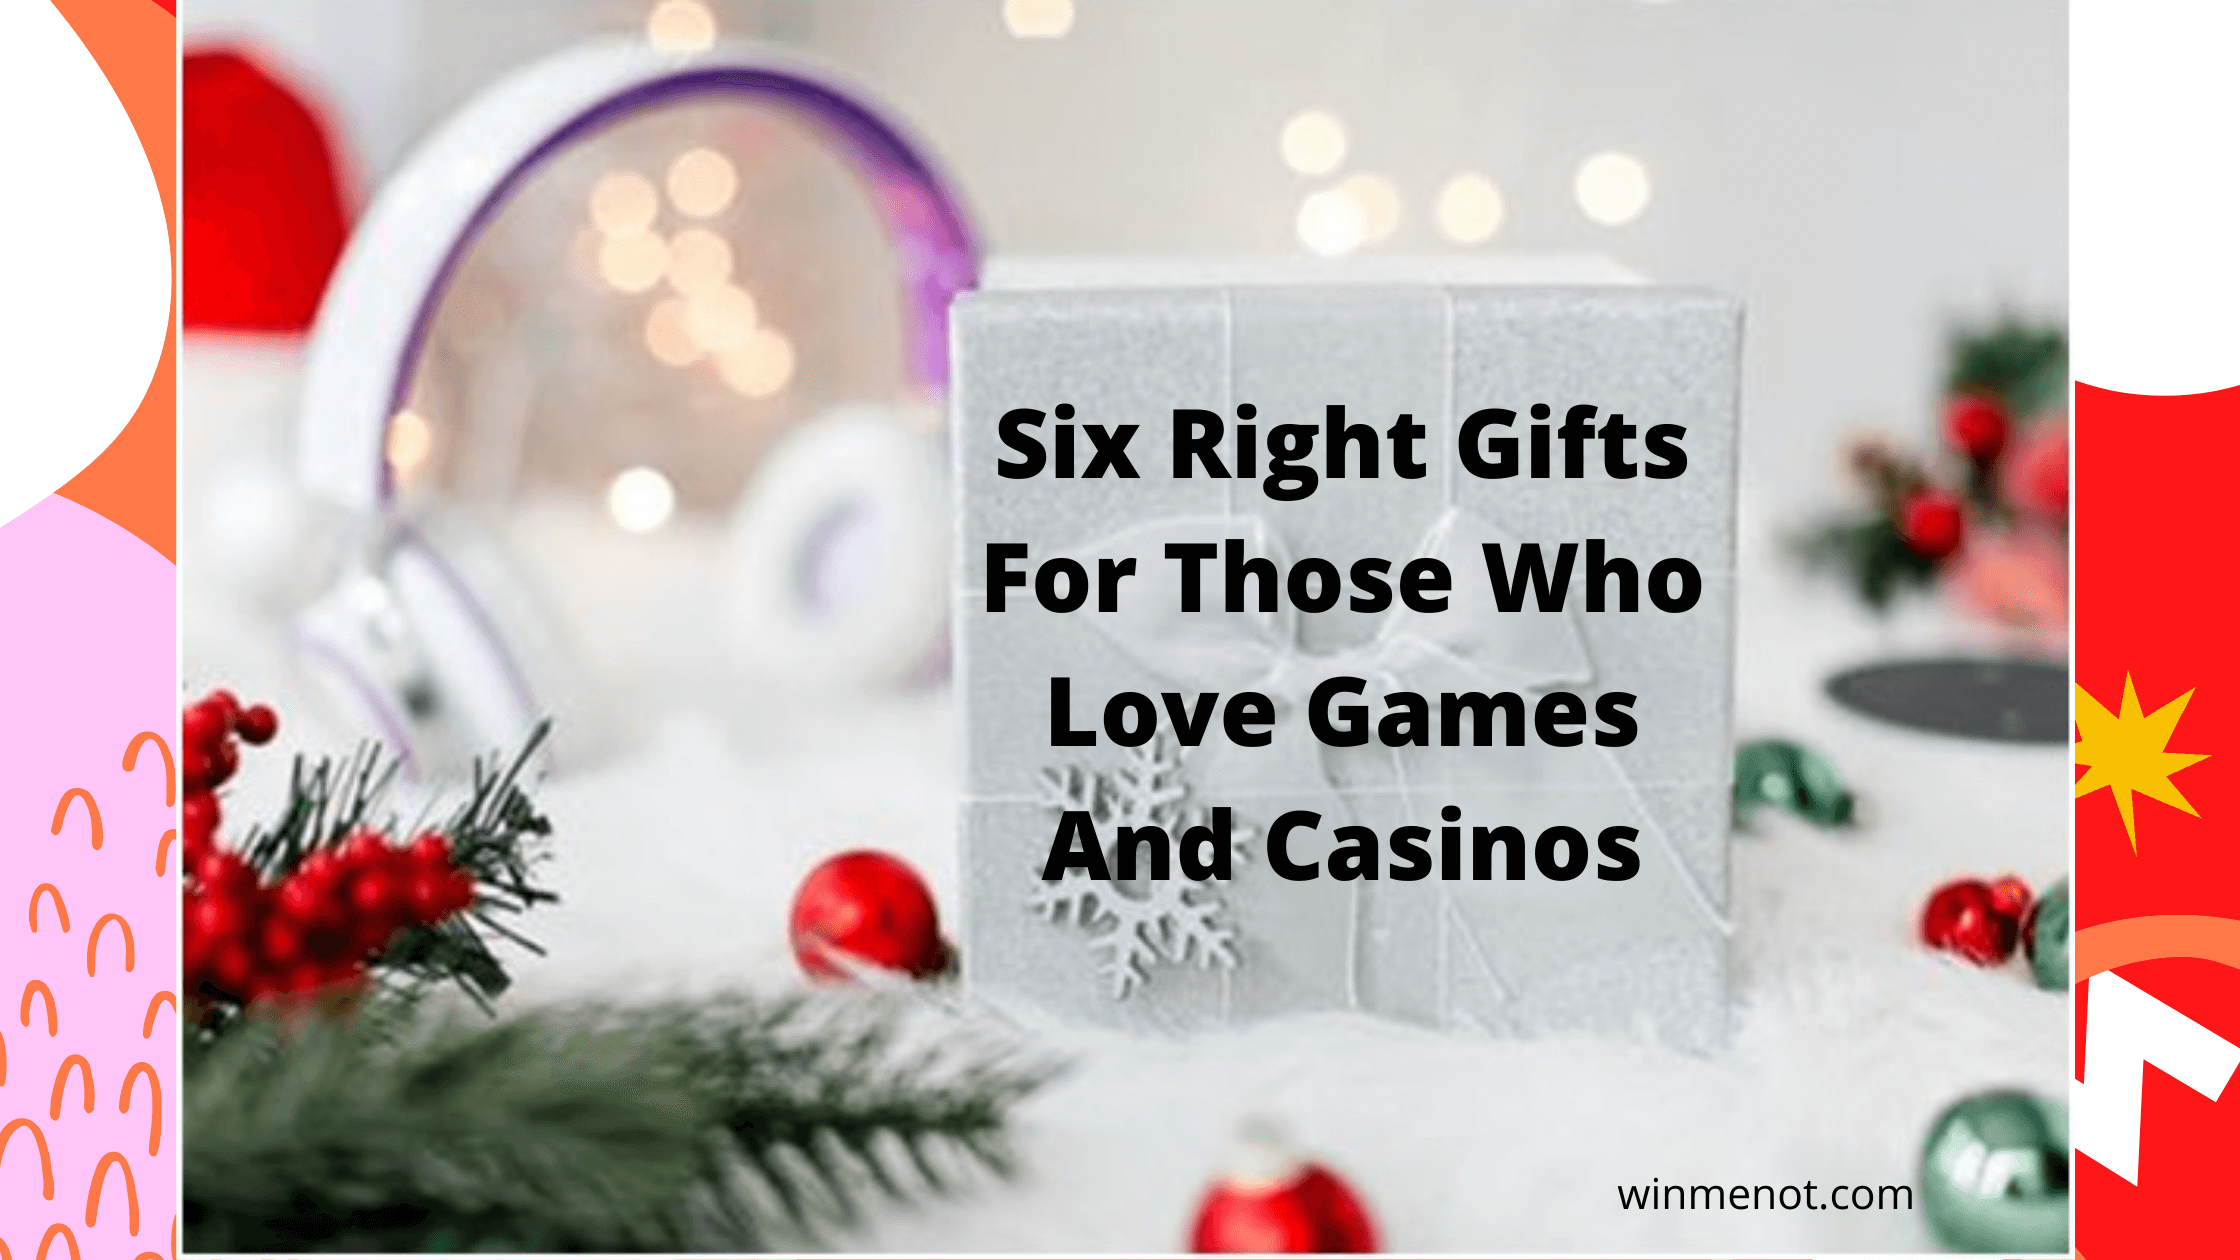 Six Right Gifts for Those Who Love Games and Casinos